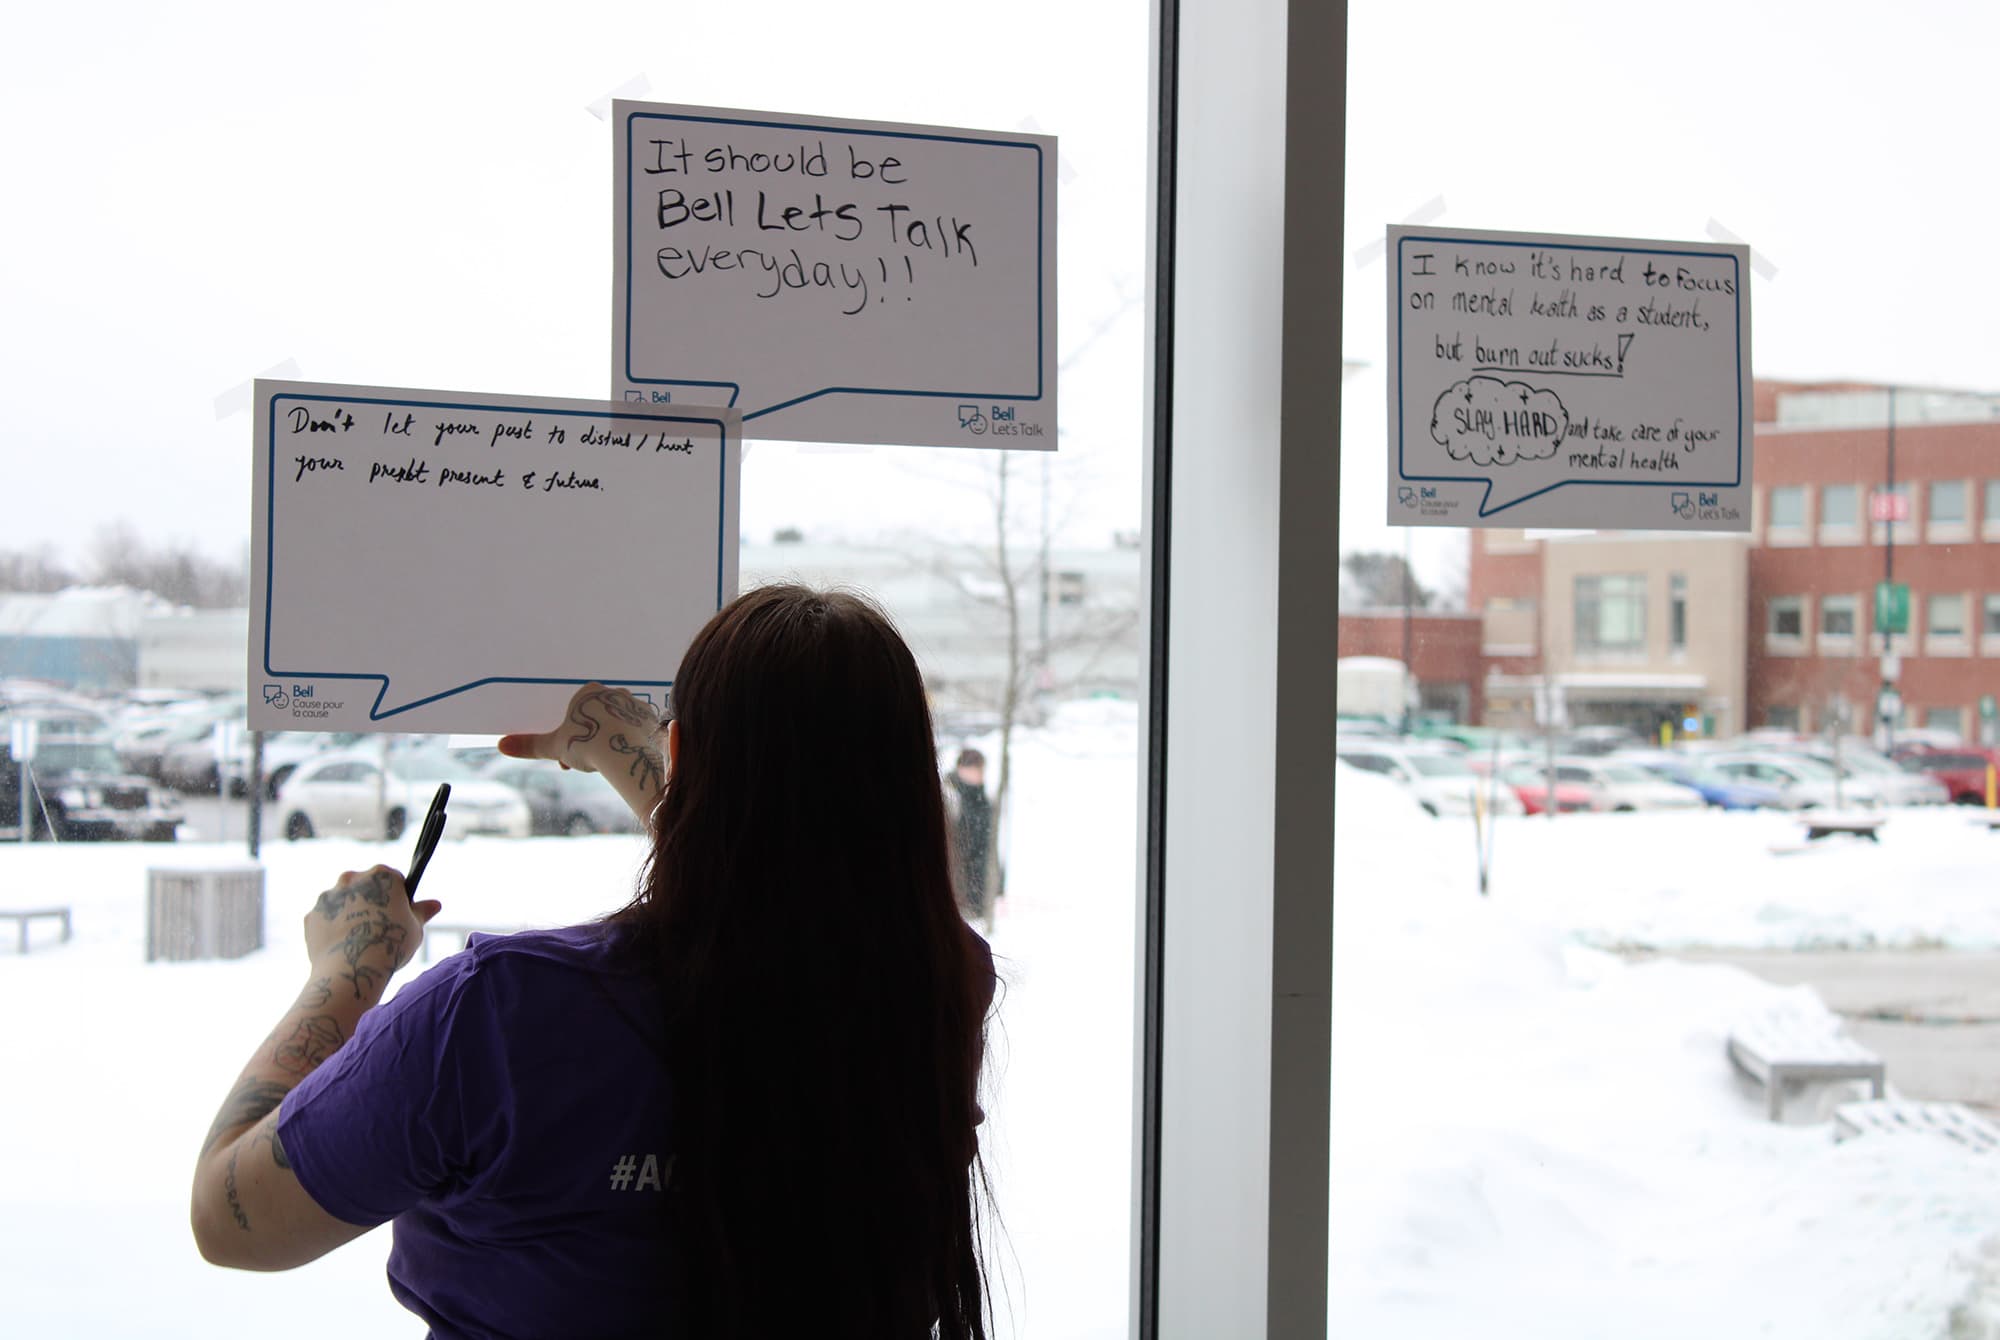 A staff member at the Students' Association displays some of the messages written by students at the event.